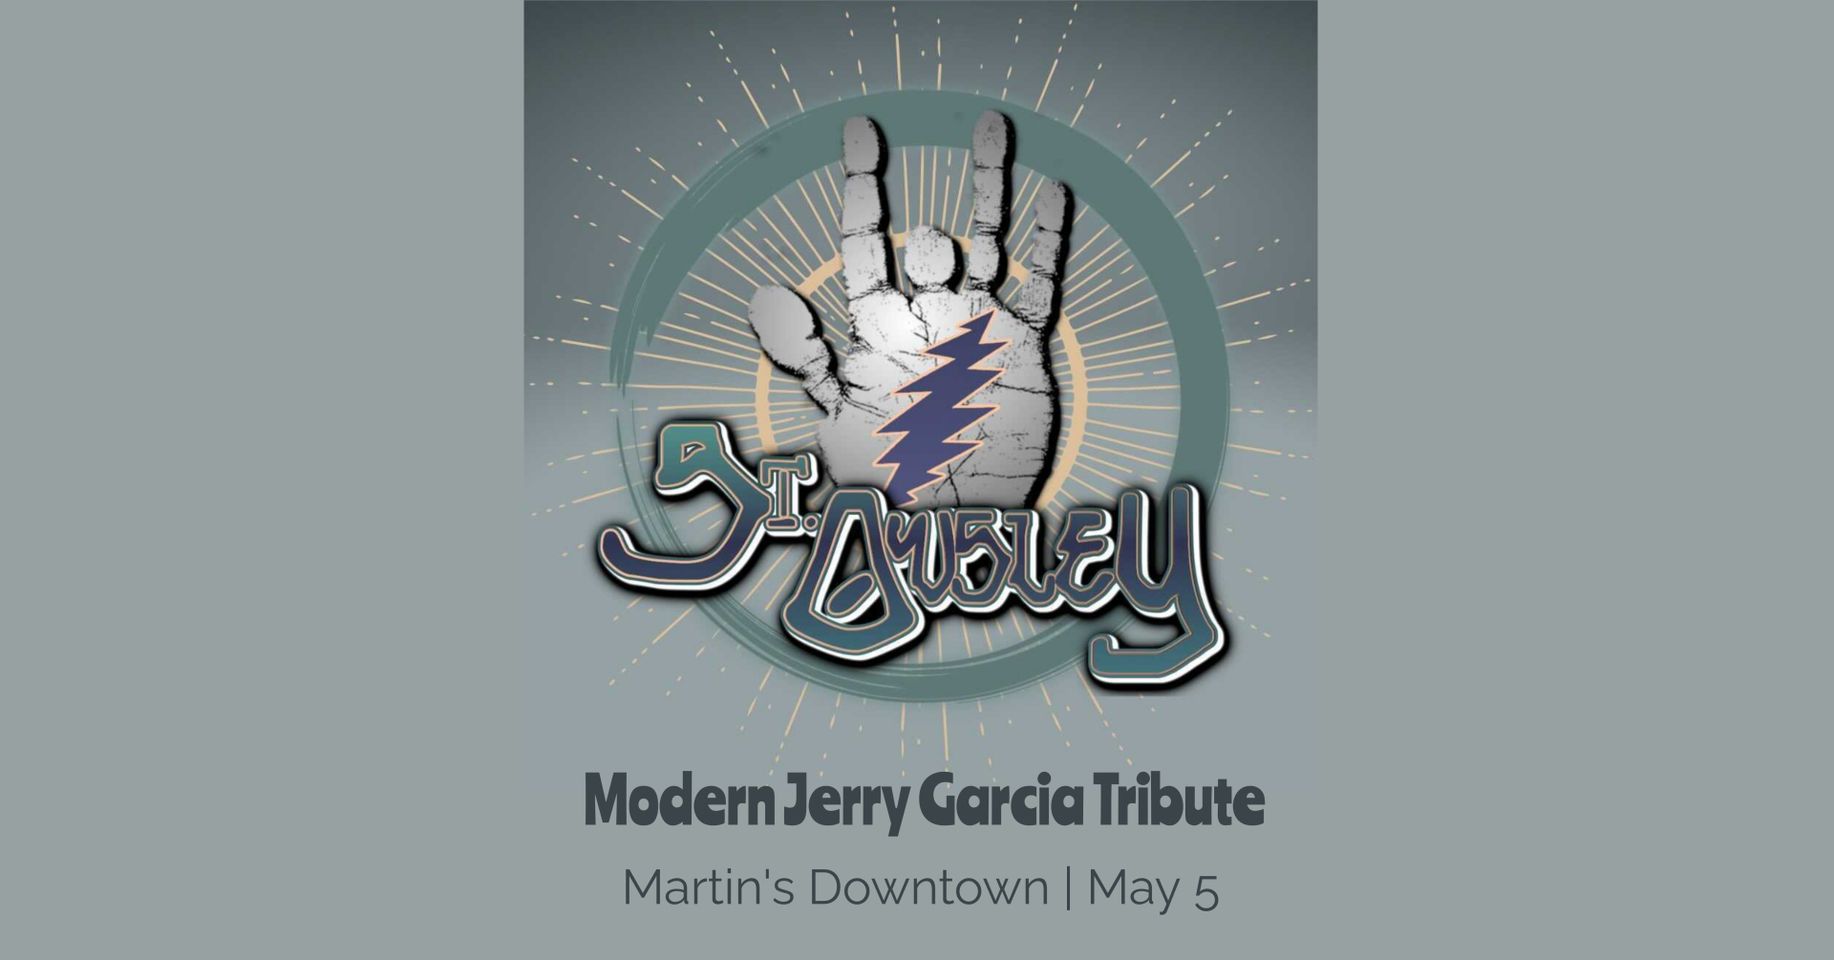 St. Owsley – Modern Jerry Garcia Tribute Live at Martin’s Downtown